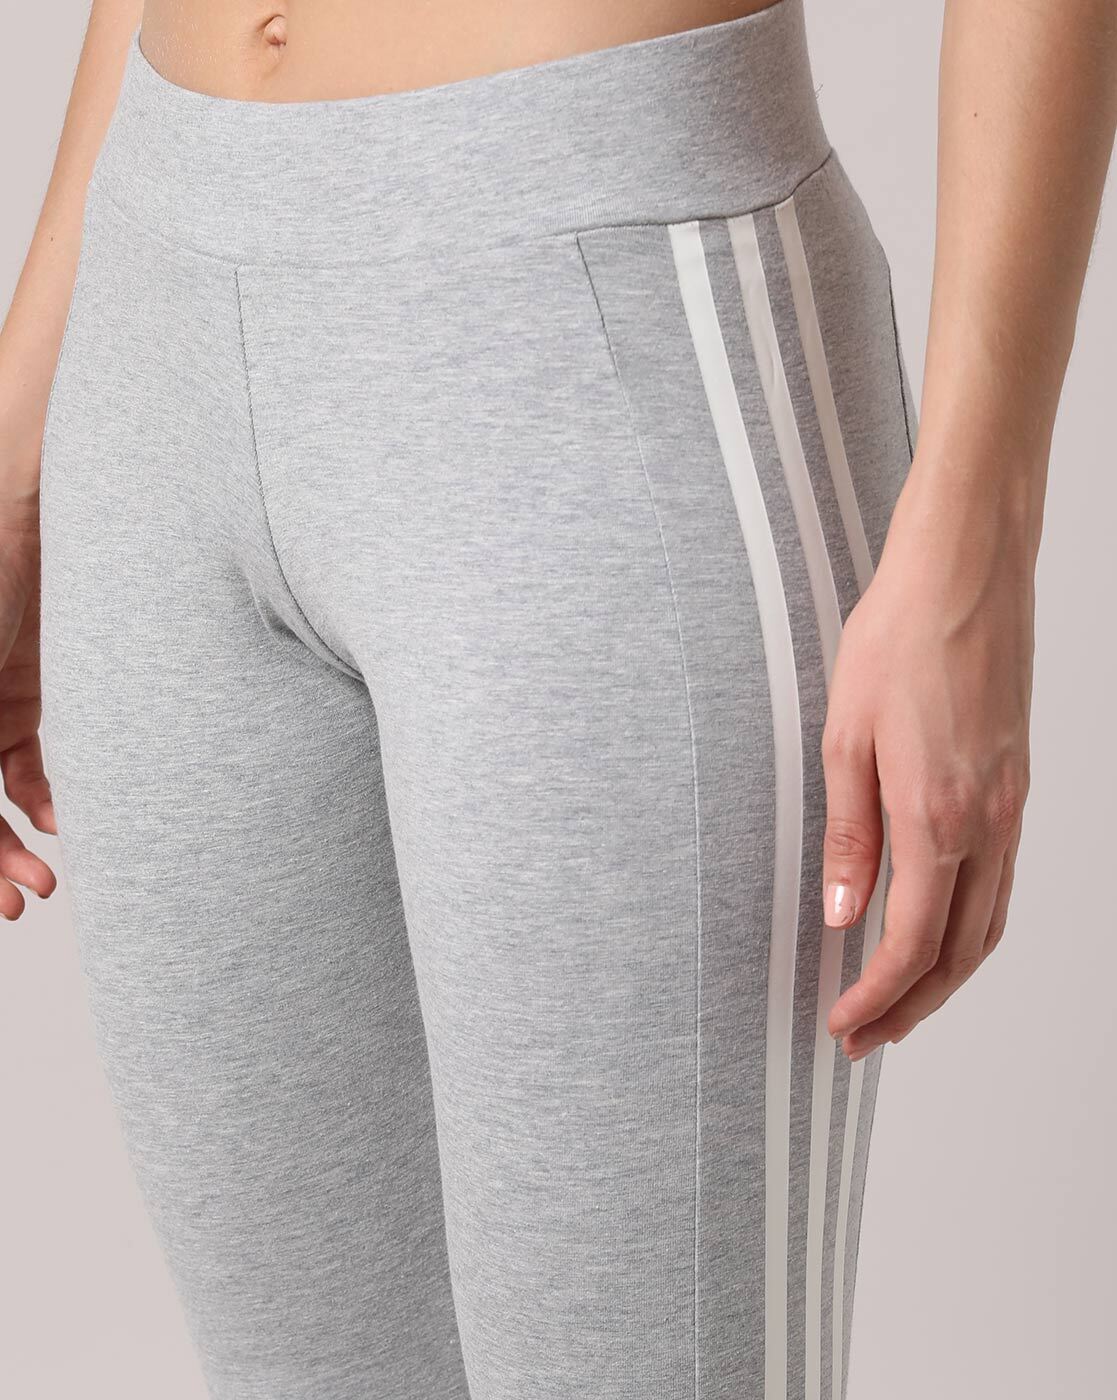 adidas x Ivy Park Women's Leggings Red HH9822| Buy Online at FOOTDISTRICT